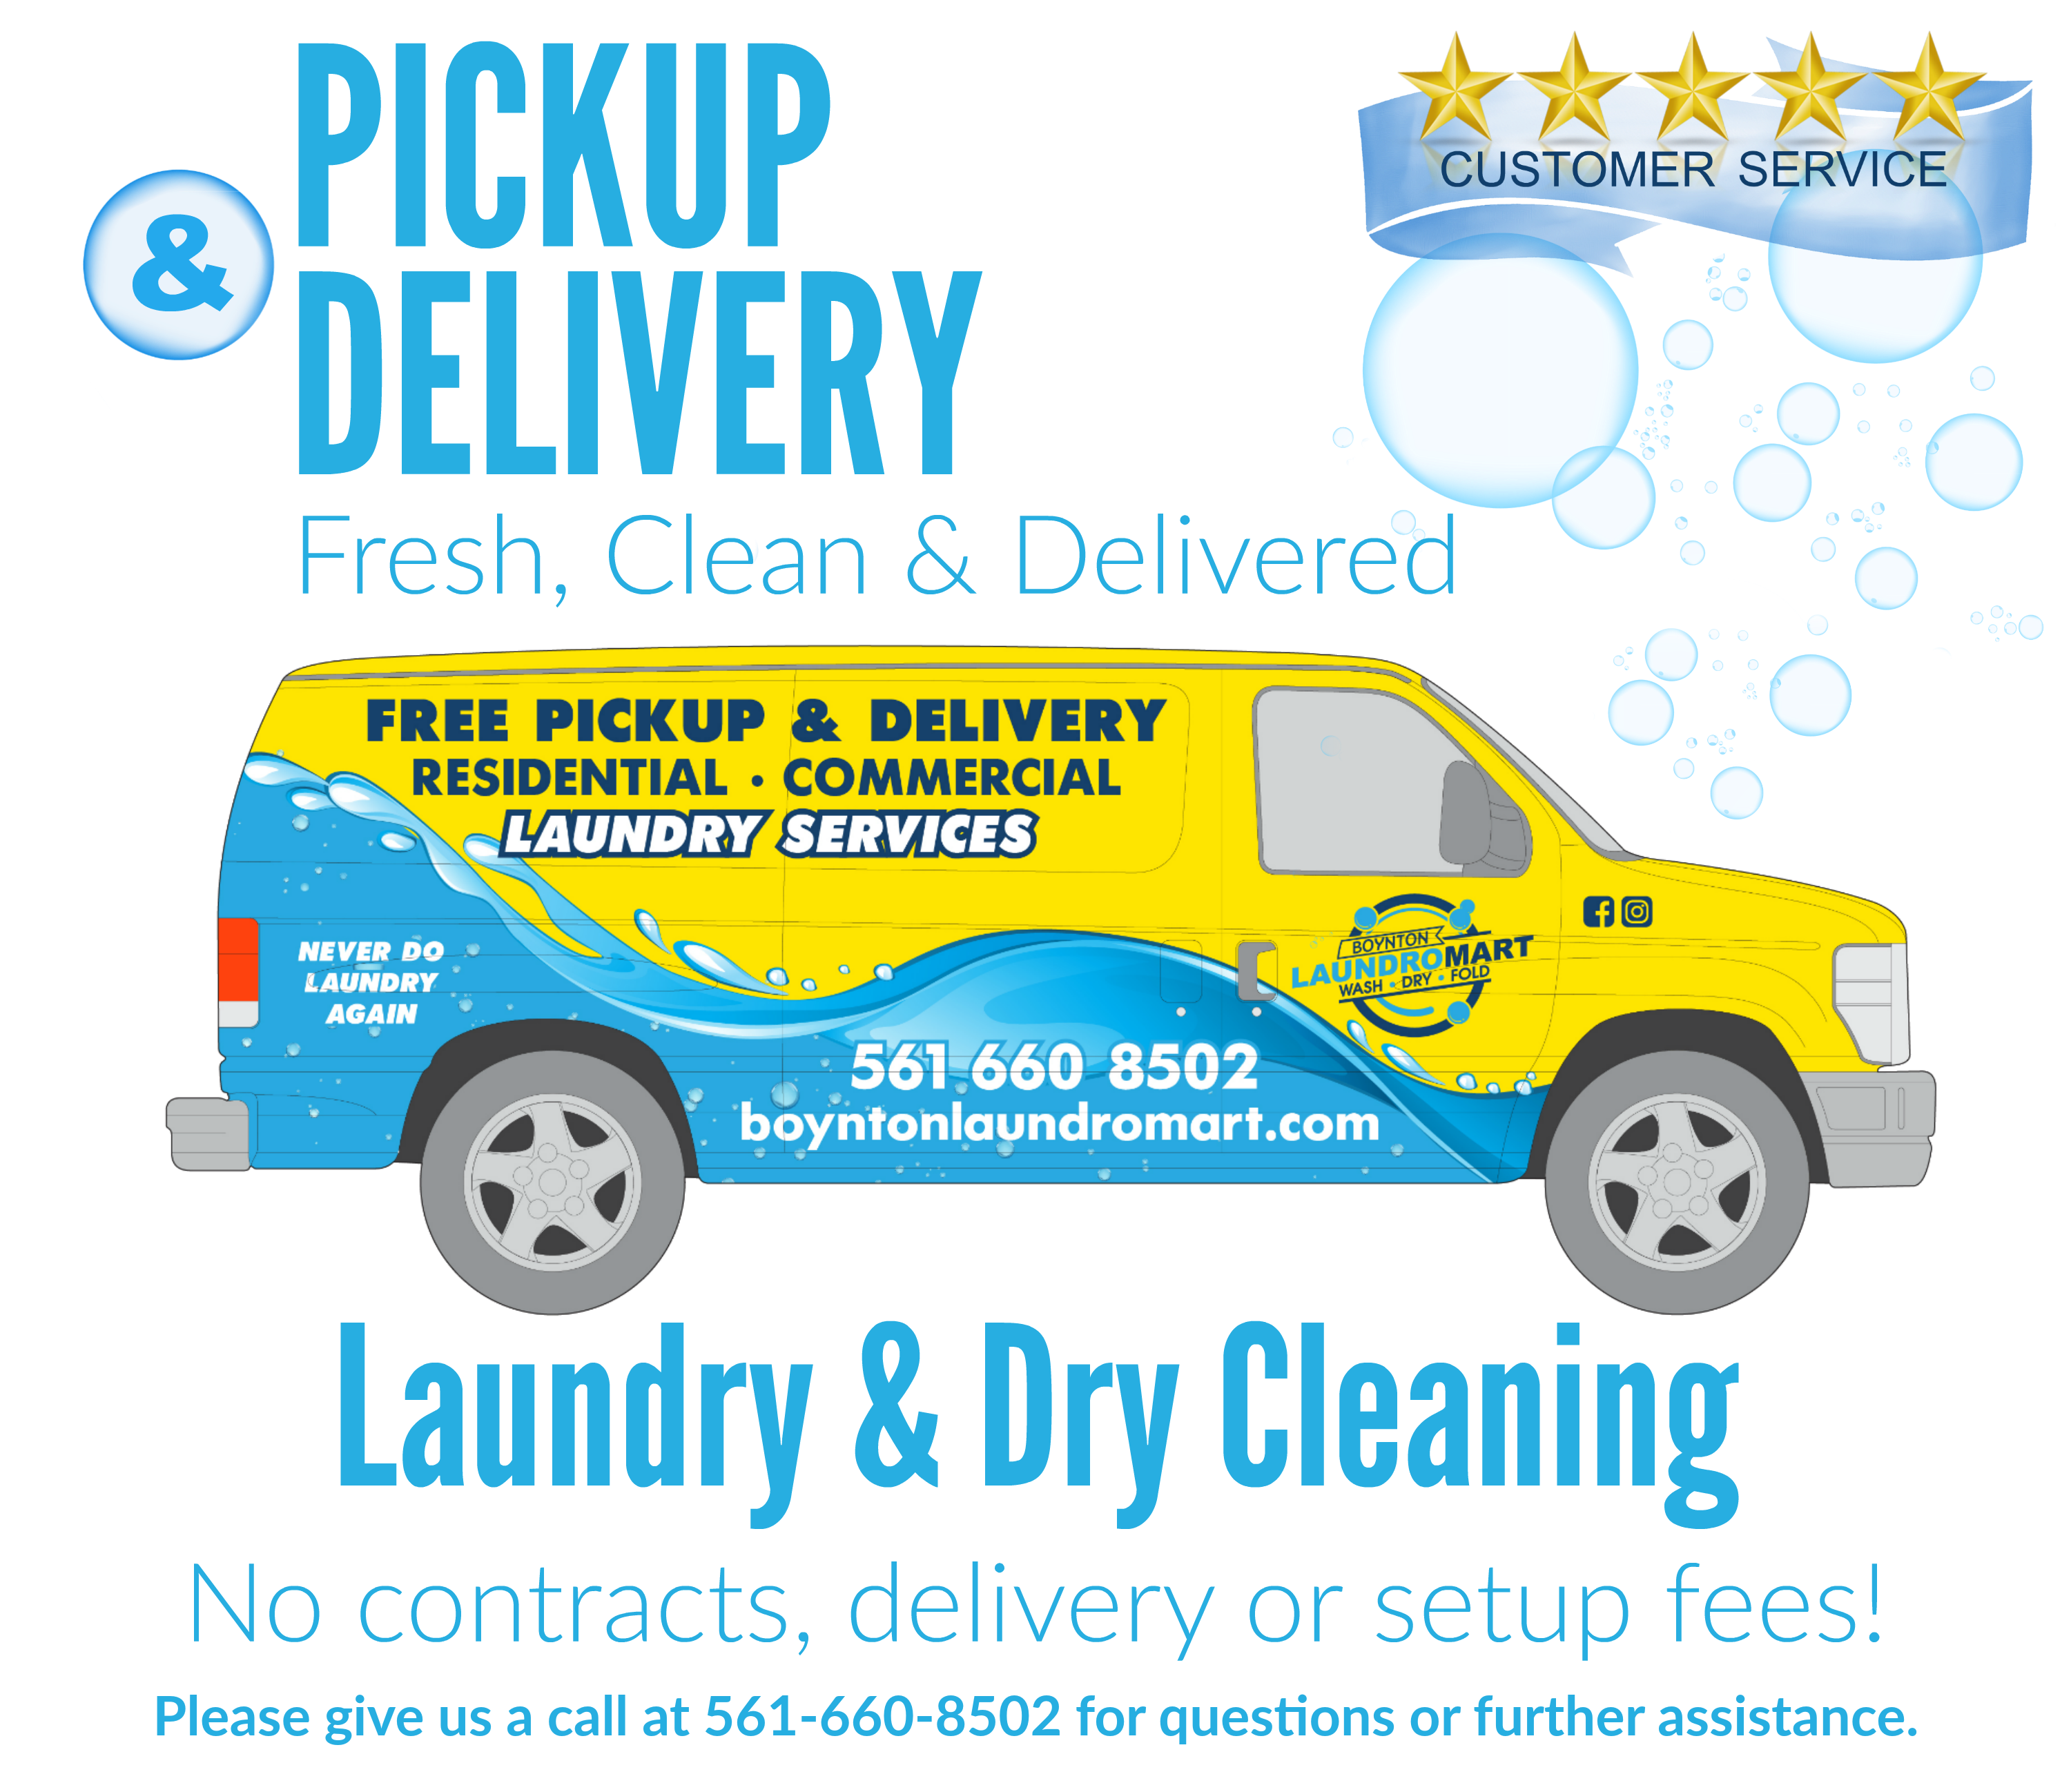 palm beach county boynton beach pickup & deliver self service laundromat and commercial laundry linen service